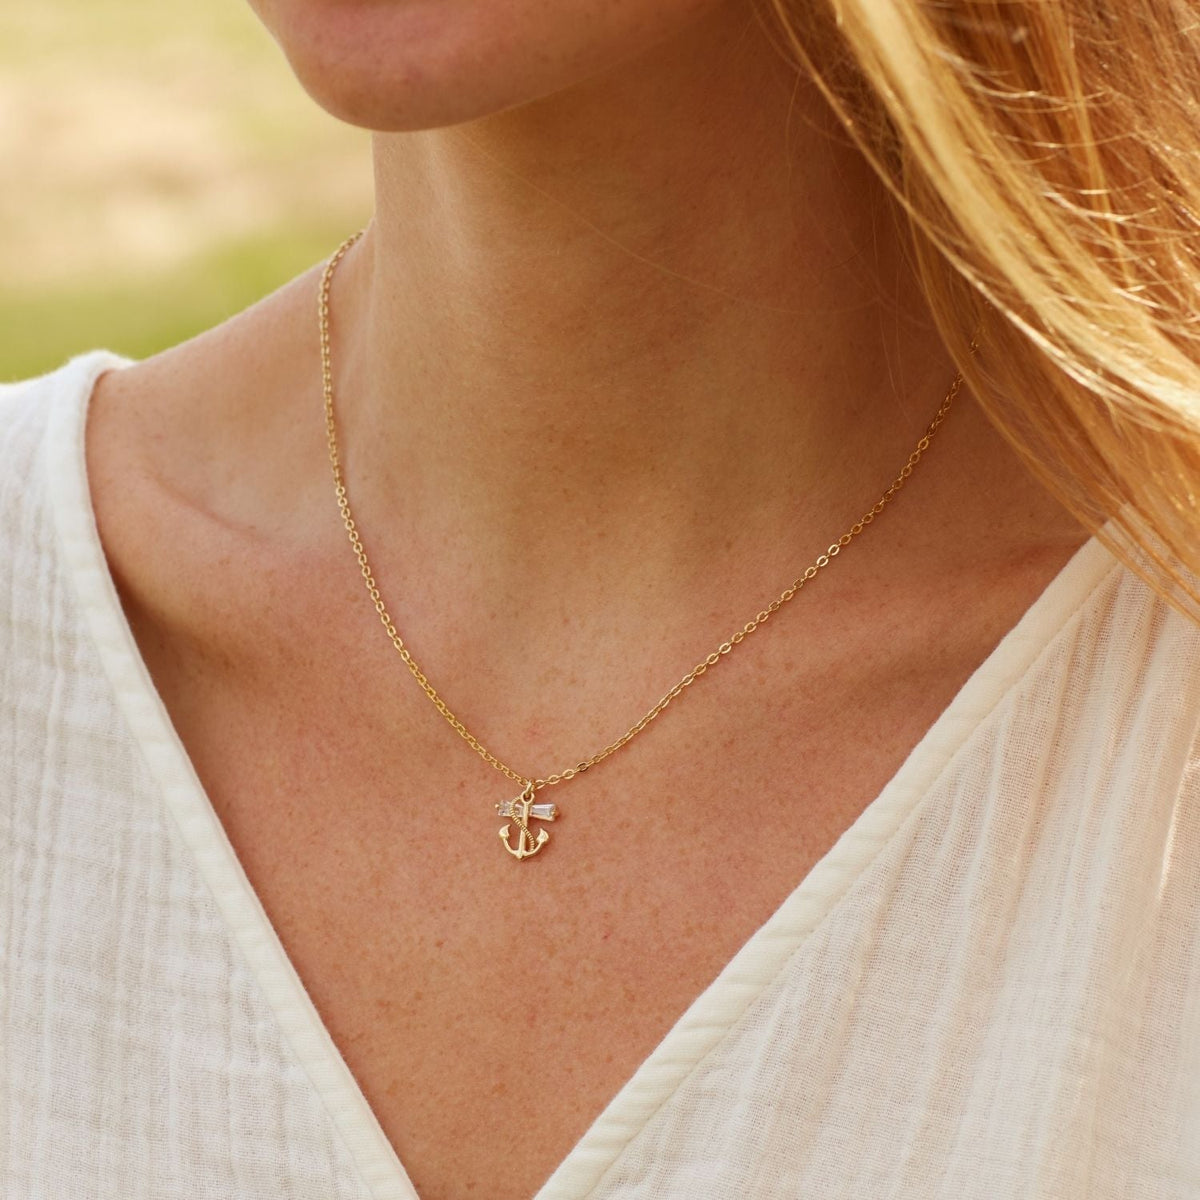 The Bond Between Aunt &amp; Niece | One of My Biggest Blessings | Anchor Necklace